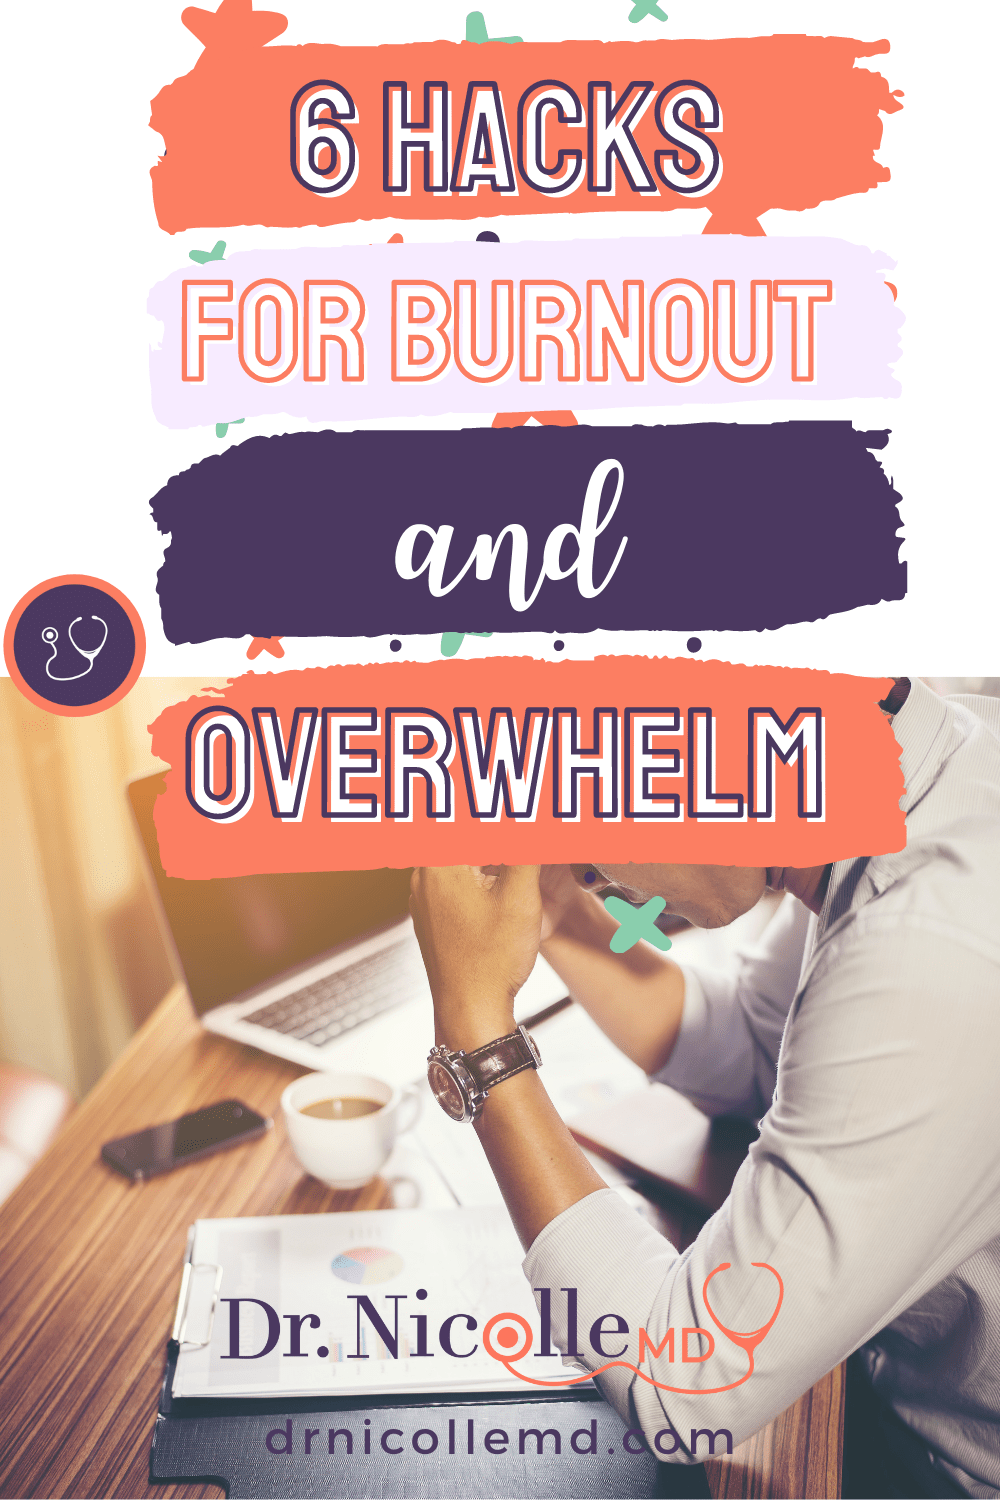 6 Hacks for Burnout and Overwhelm